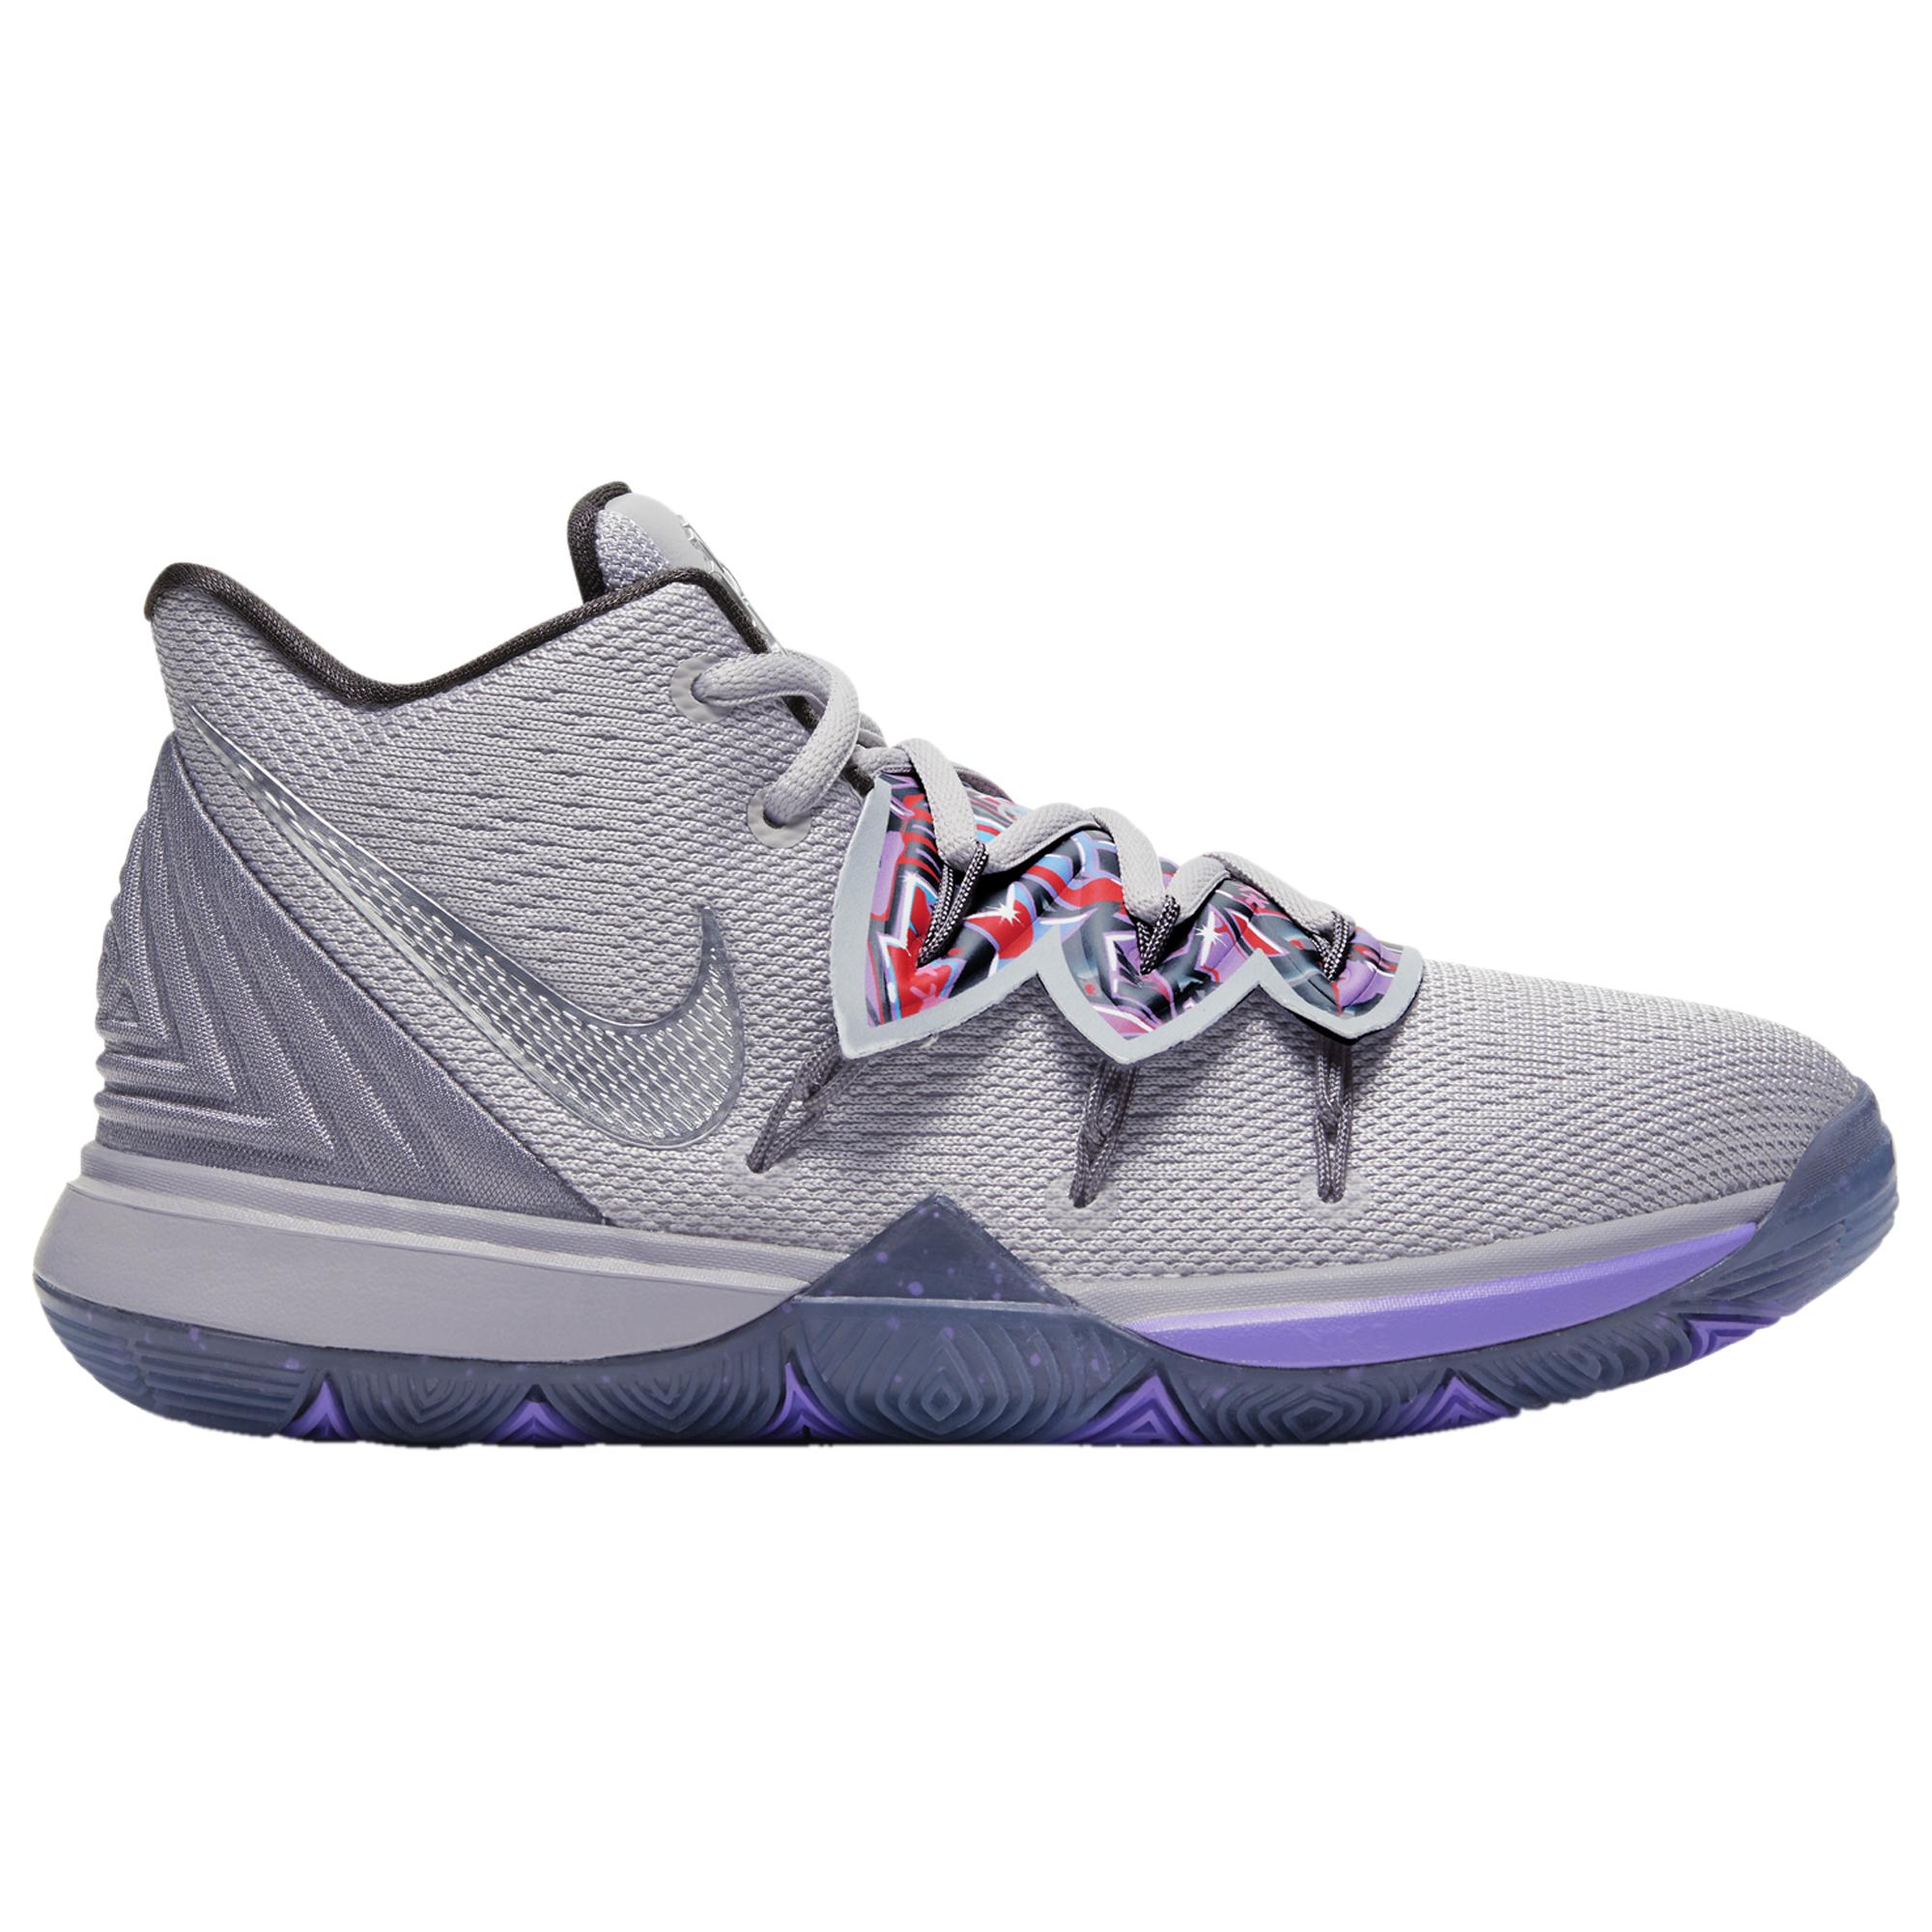 Nike Rubber Kyrie 5 Basketball Shoes in 